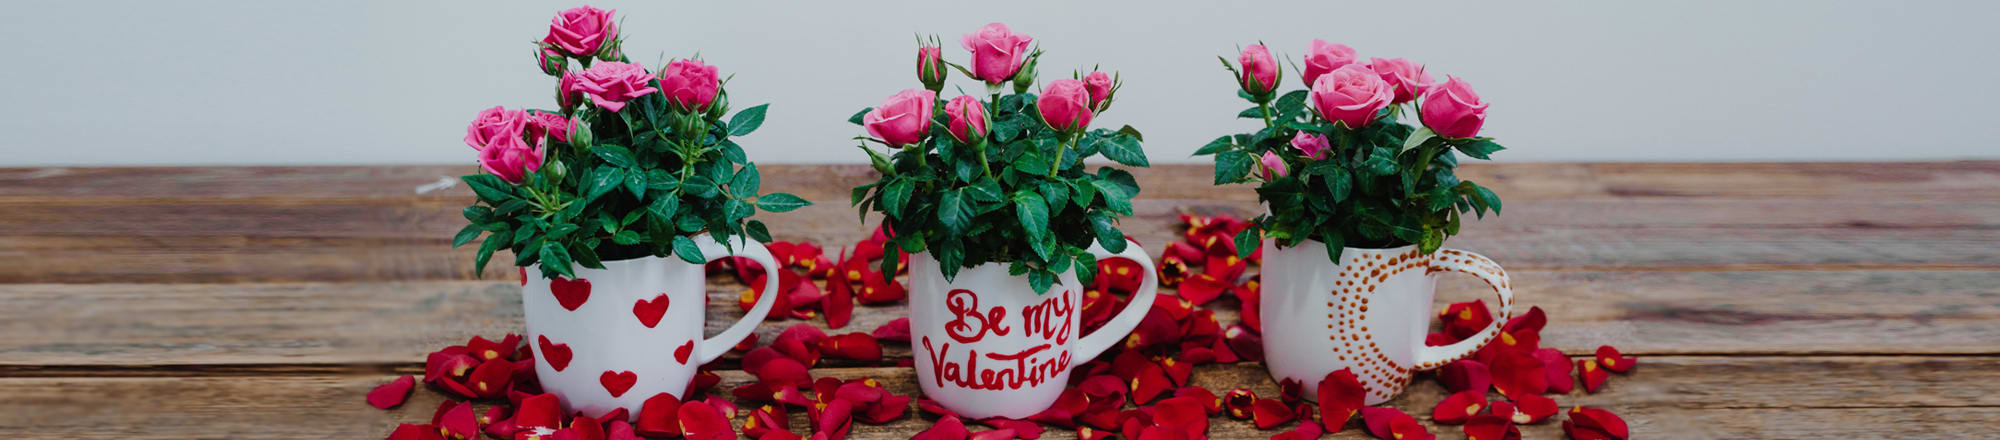 Loving - Coffee or Tea Time with roses